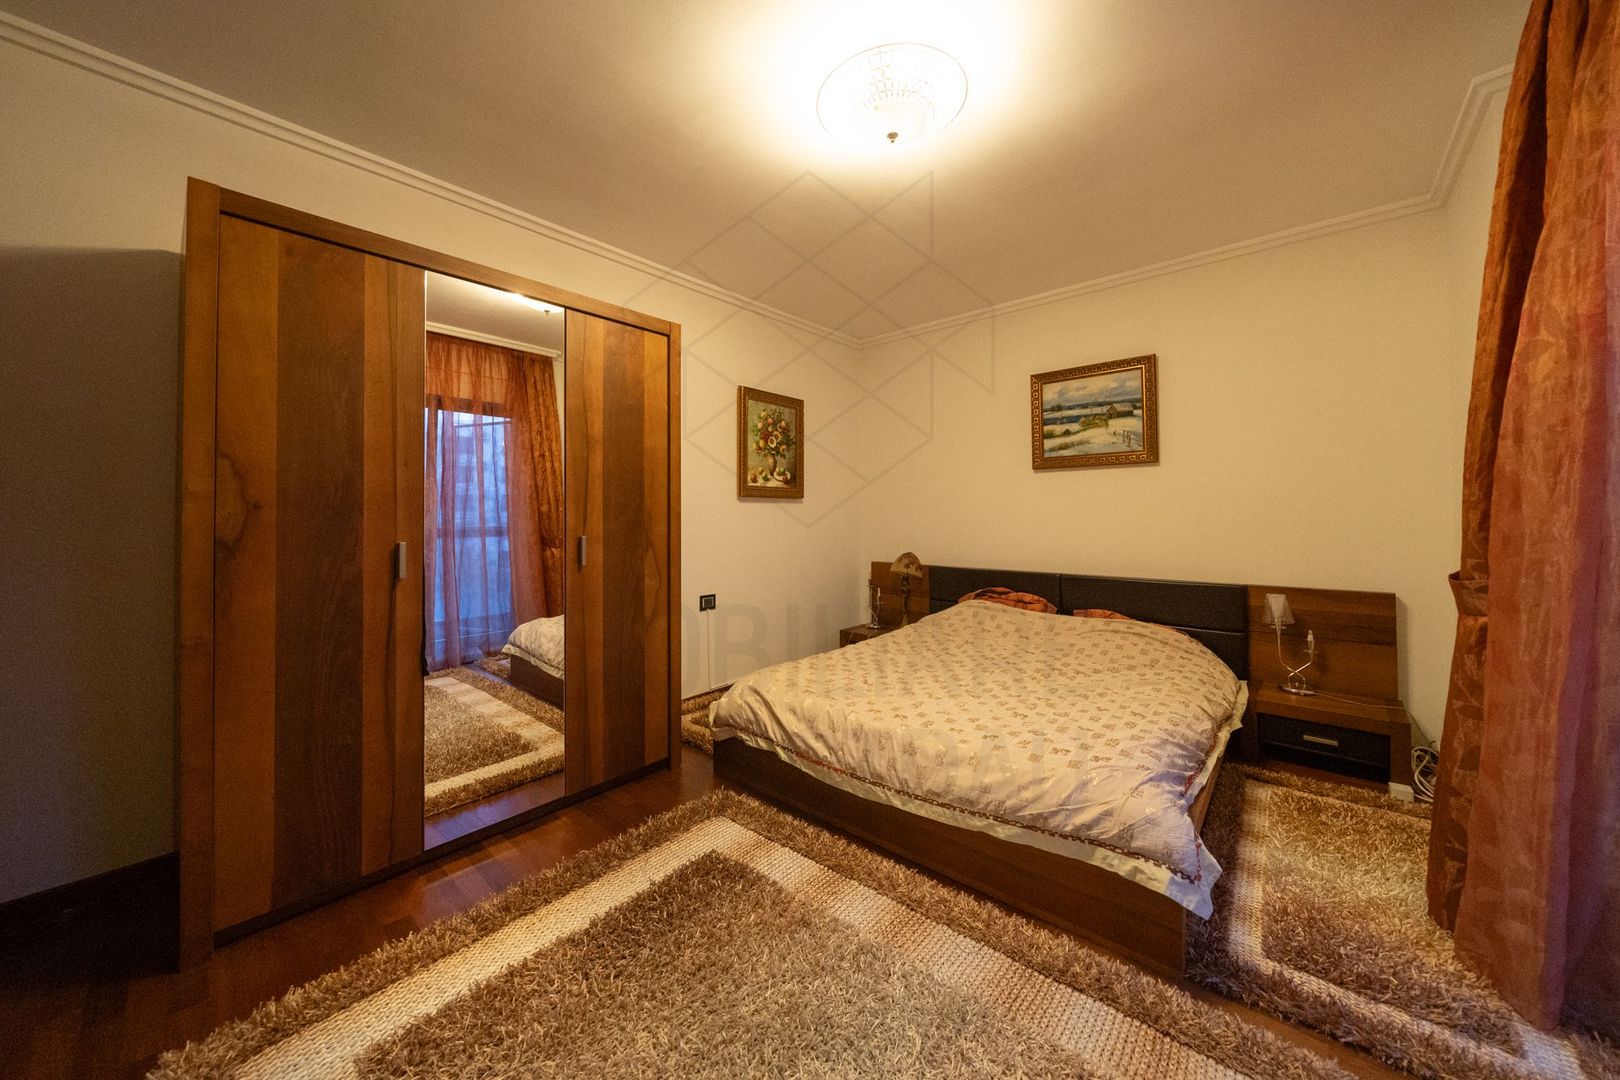 Herastrau 4 rooms Park view | North Road | Investment opportunity